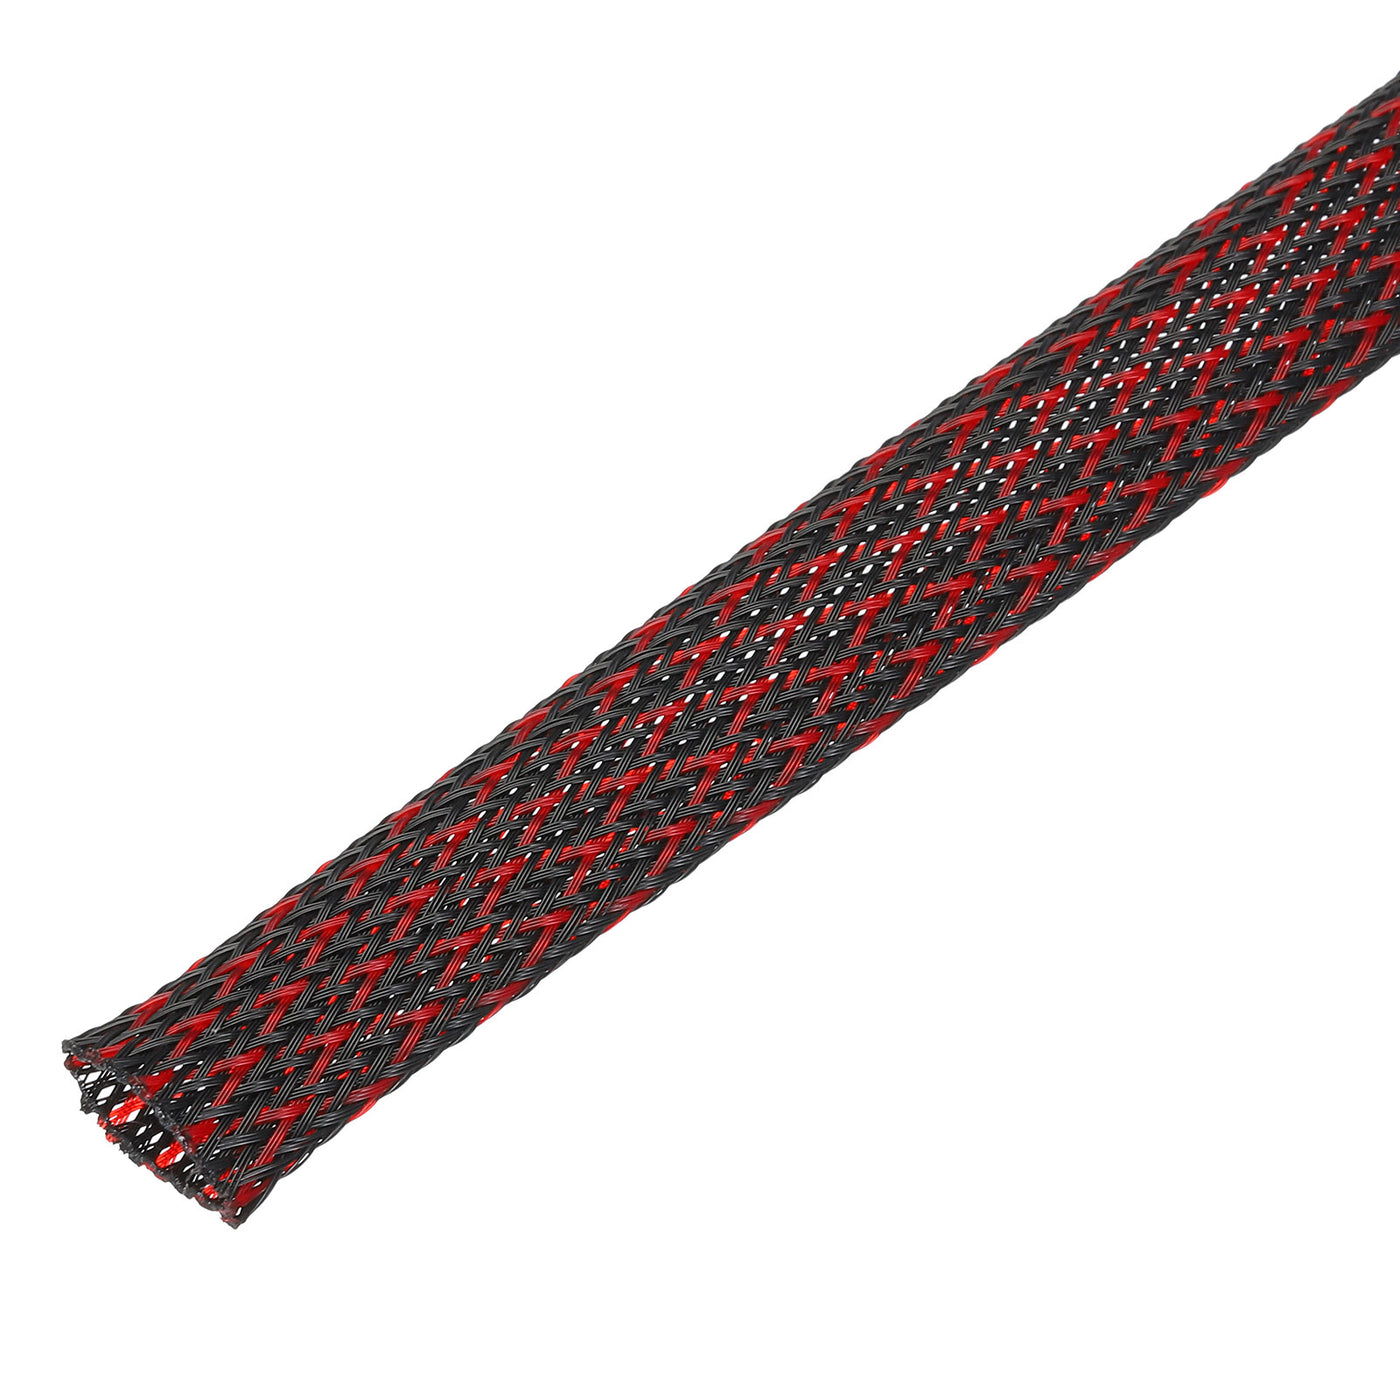 uxcell Uxcell Insulation Braid Sleeving, 9.84 Ft-19mm High Temperature Sleeve Black Red